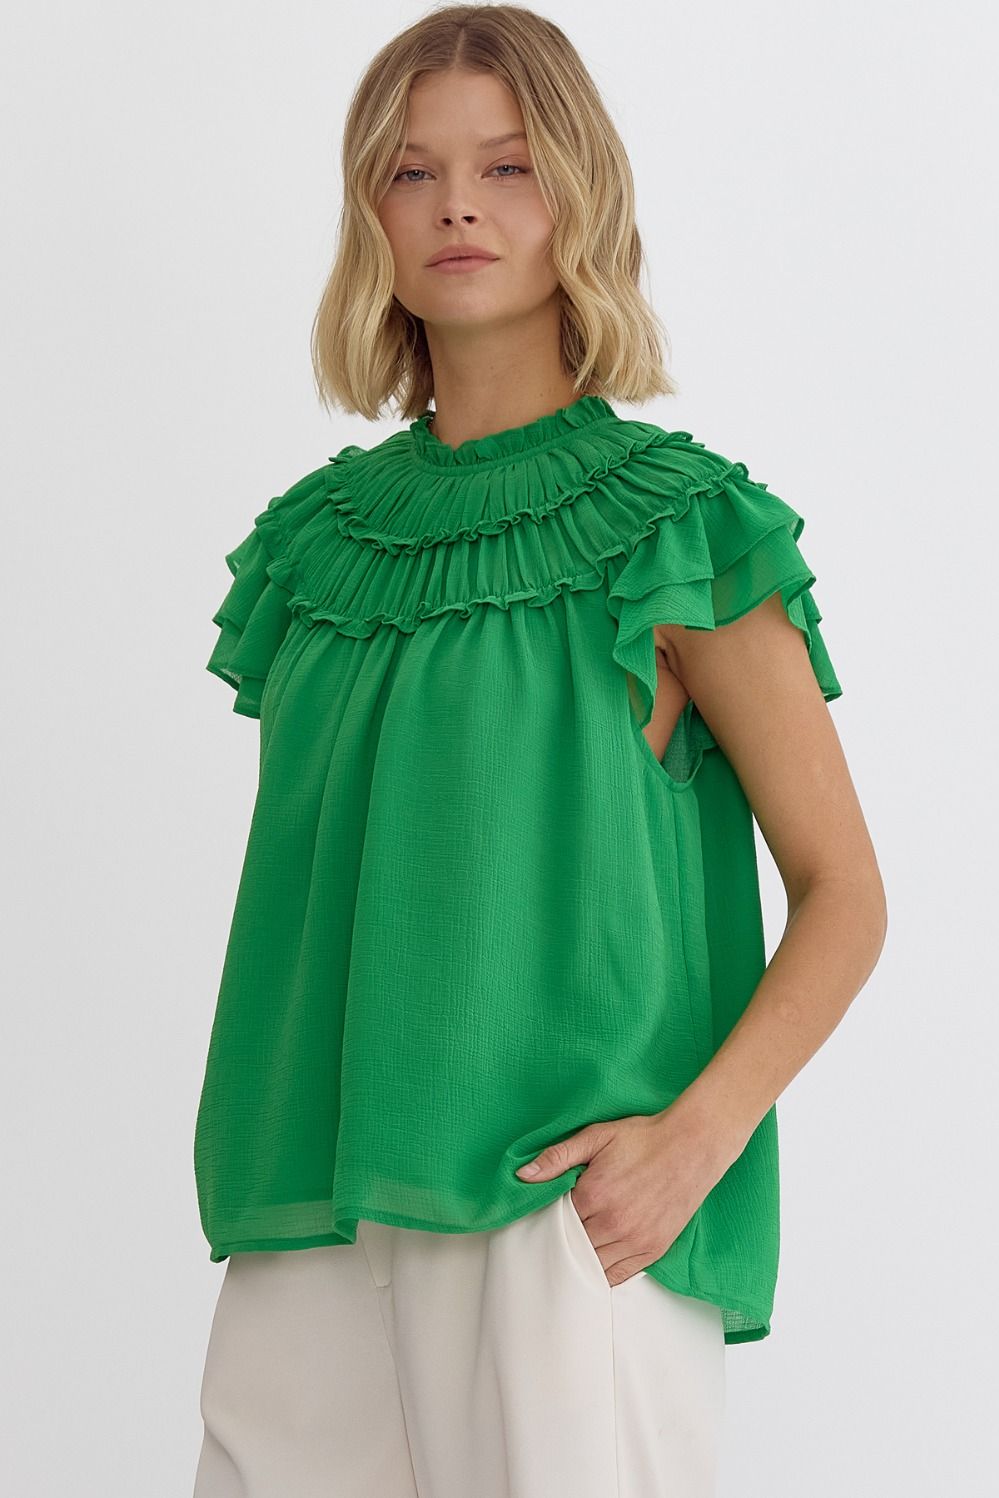 ENTRO INC Women's Top GREEN / S Pleated Ruffle Short Sleeve Top || David's Clothing T23160